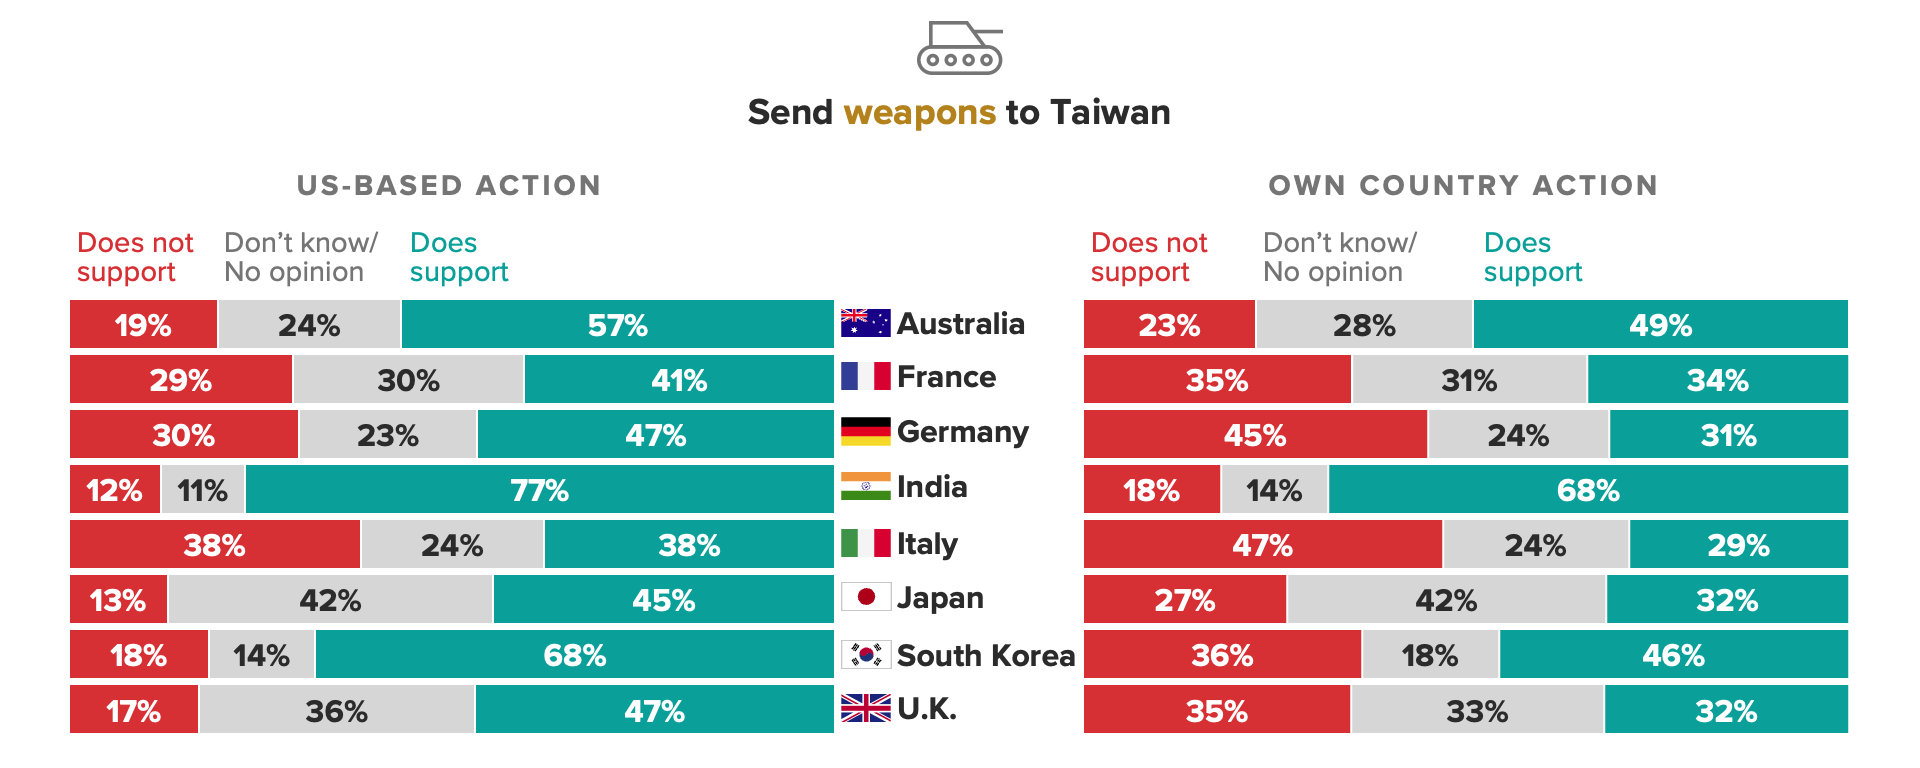 Bar charts showing support by individual U.S. allies for sending troops to Taiwan if China invades